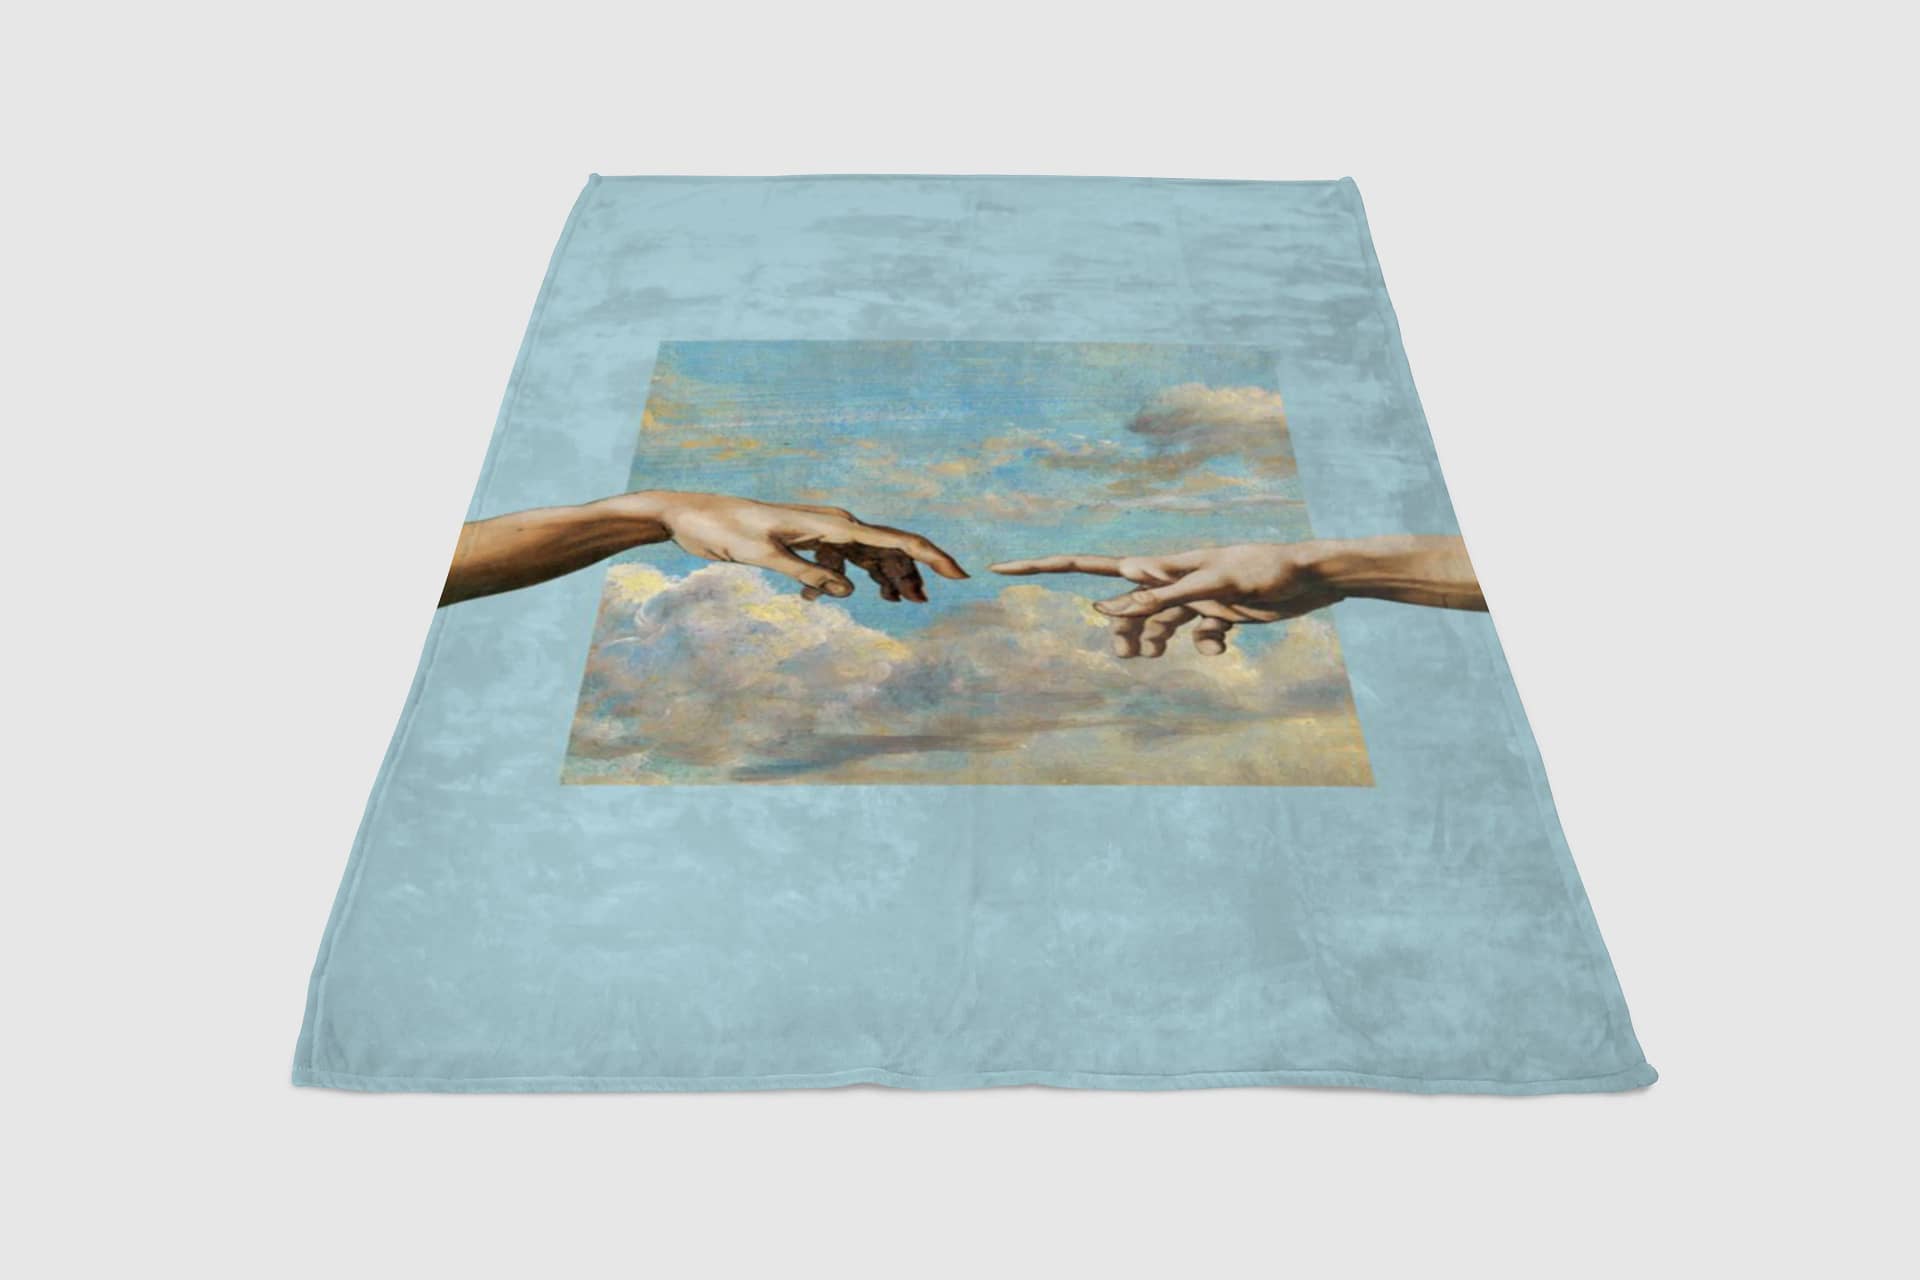 Two Hands Touching Painting Fleece Blanket